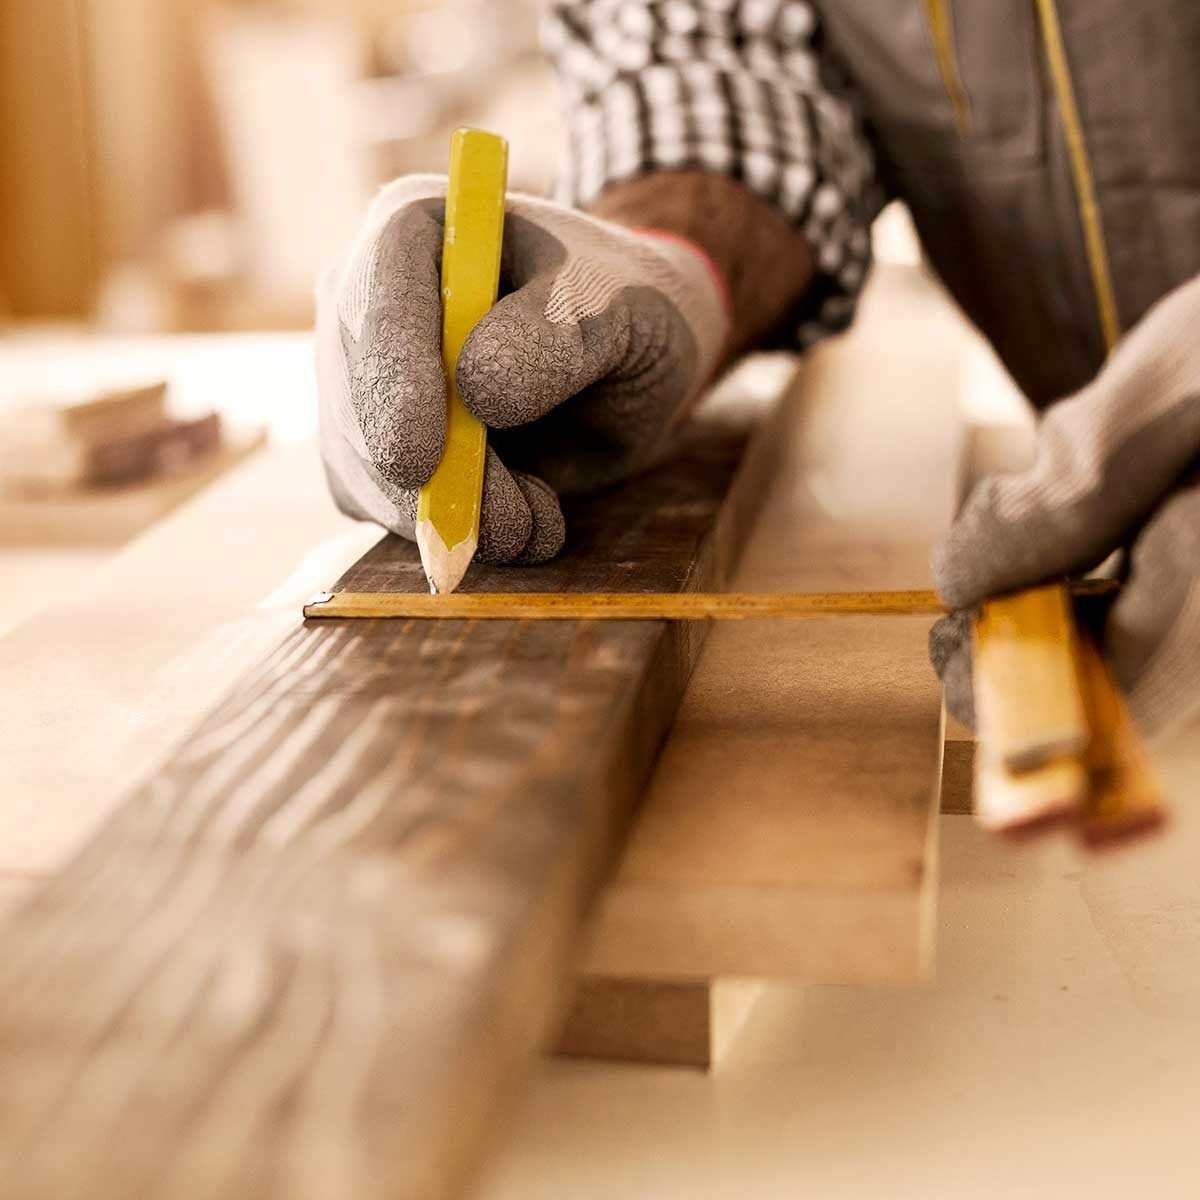 List of the most common carpentry tools and tricks to use them